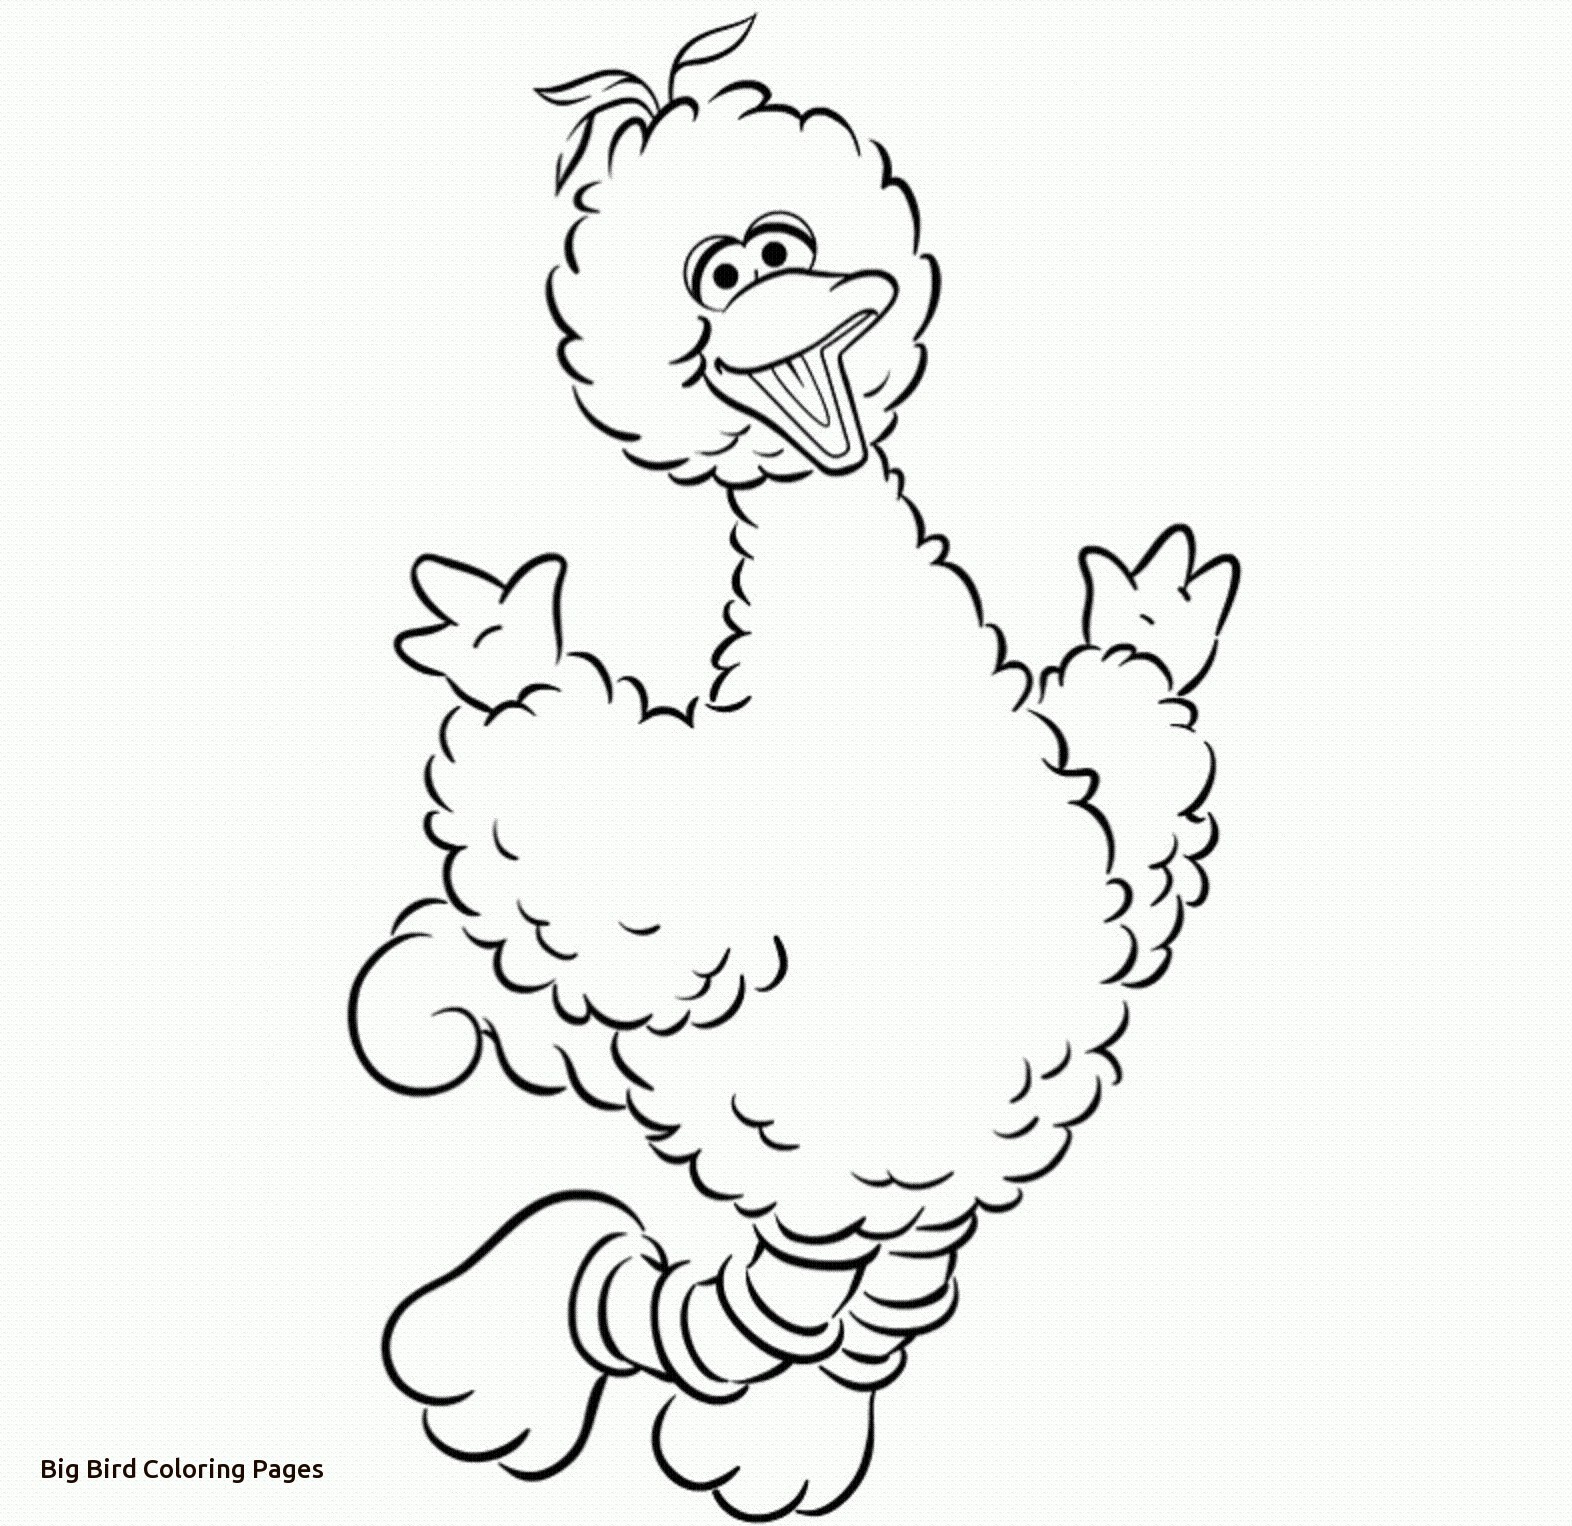 Big Bird Coloring Pages